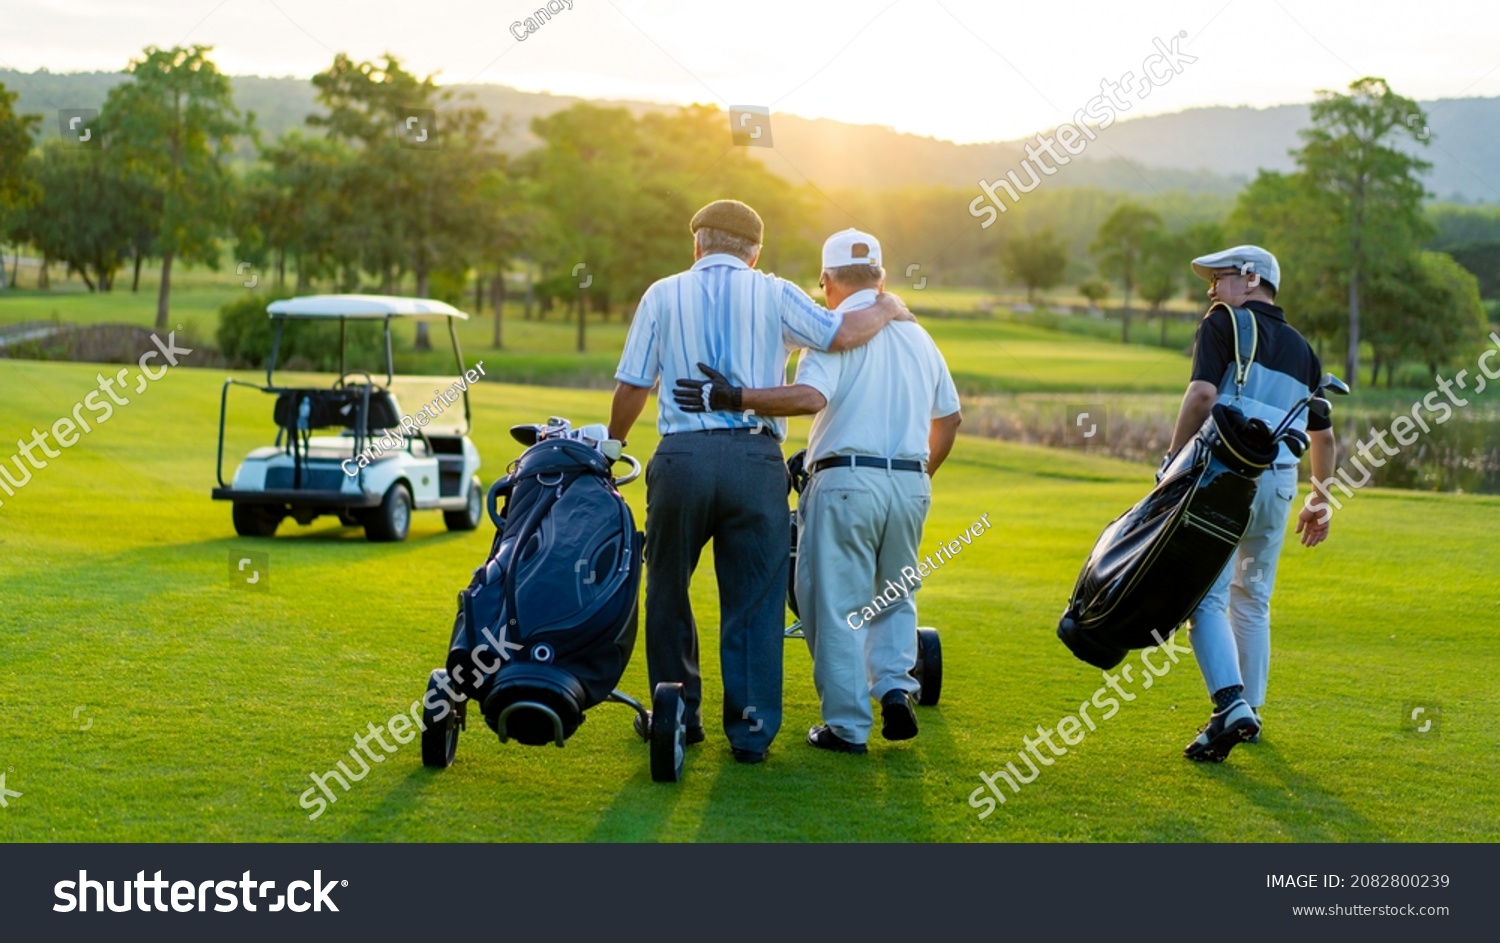 Group of Asian people businessman and senior CEO enjoy outdoor sport  golfing together at country club. Healthy men golfer holding golf bag walking on fairway with talking together at summer sunset #2082800239